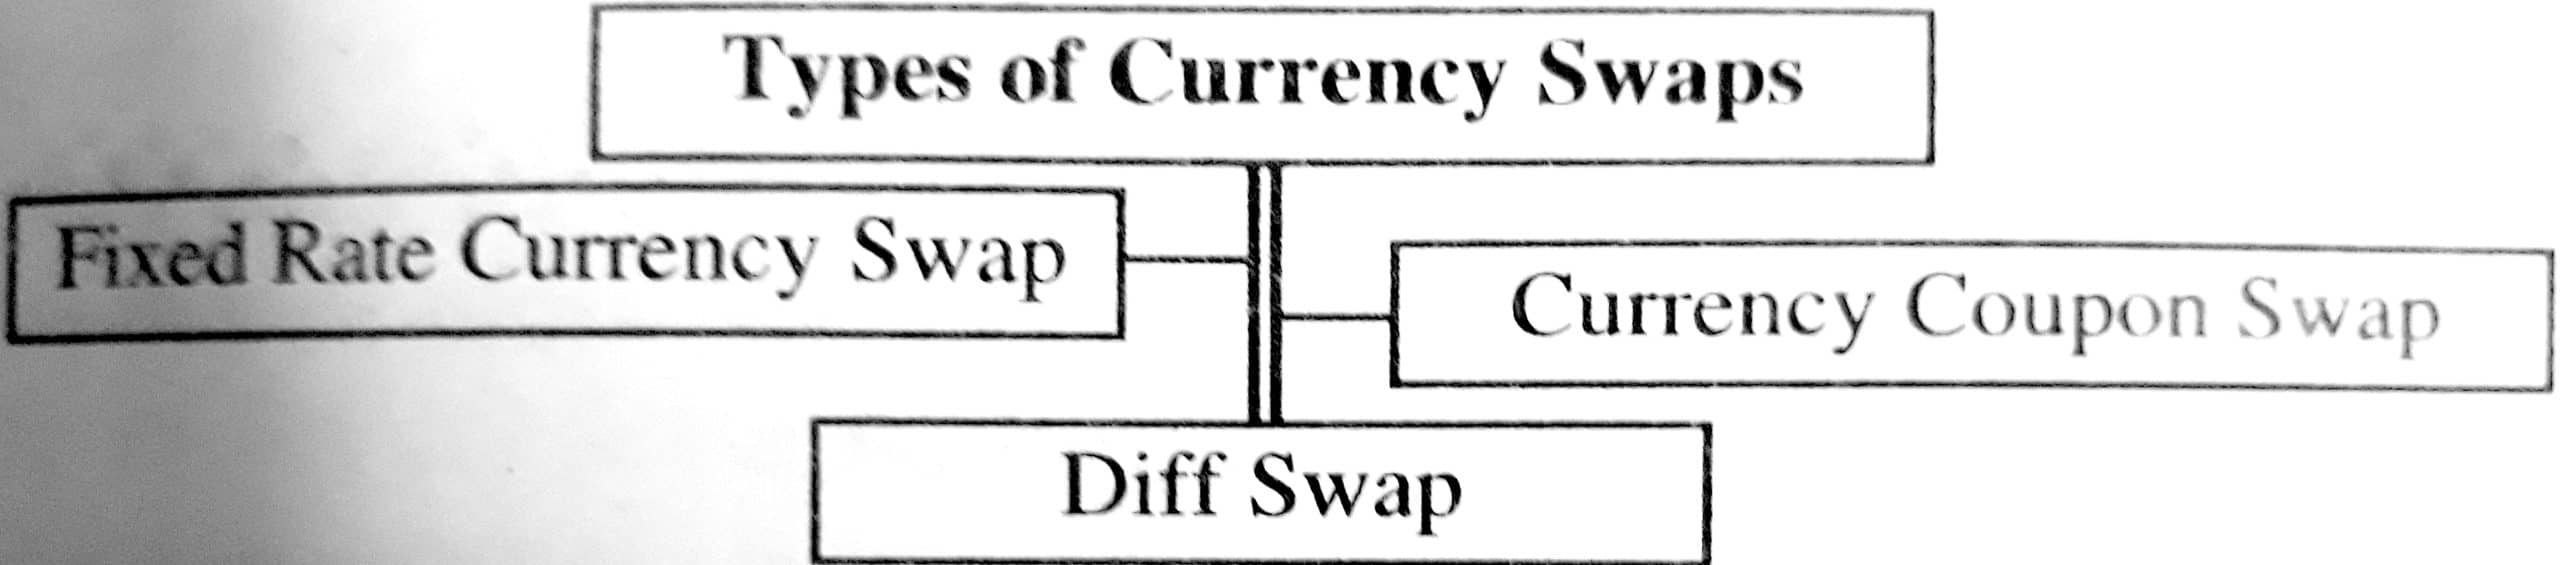 Types of Currency Swaps